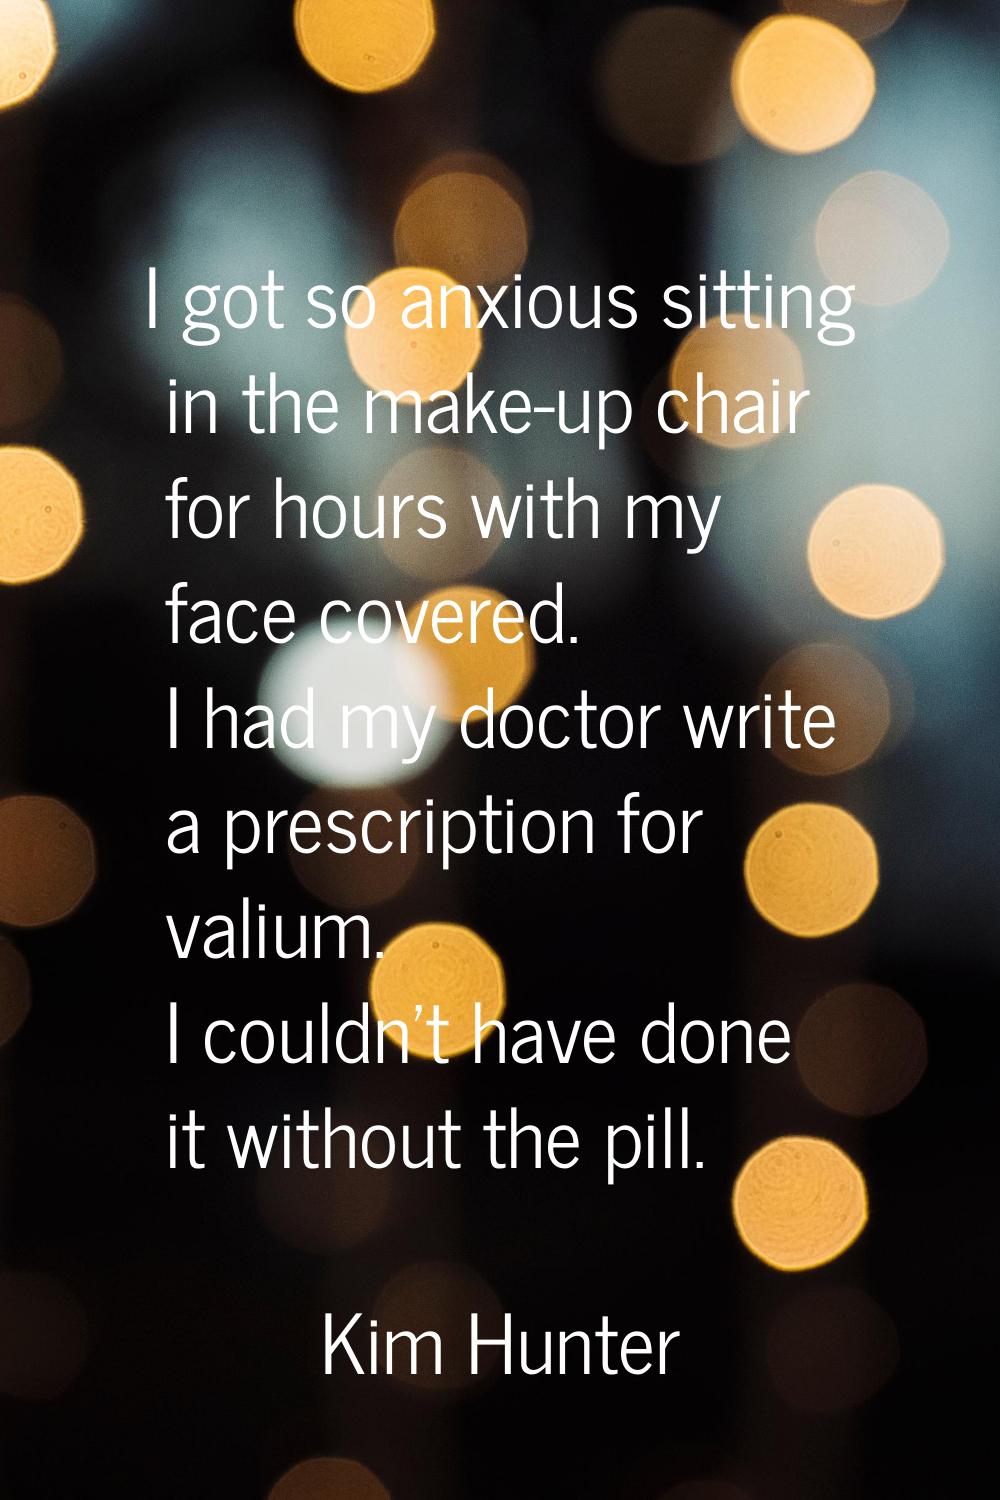 I got so anxious sitting in the make-up chair for hours with my face covered. I had my doctor write